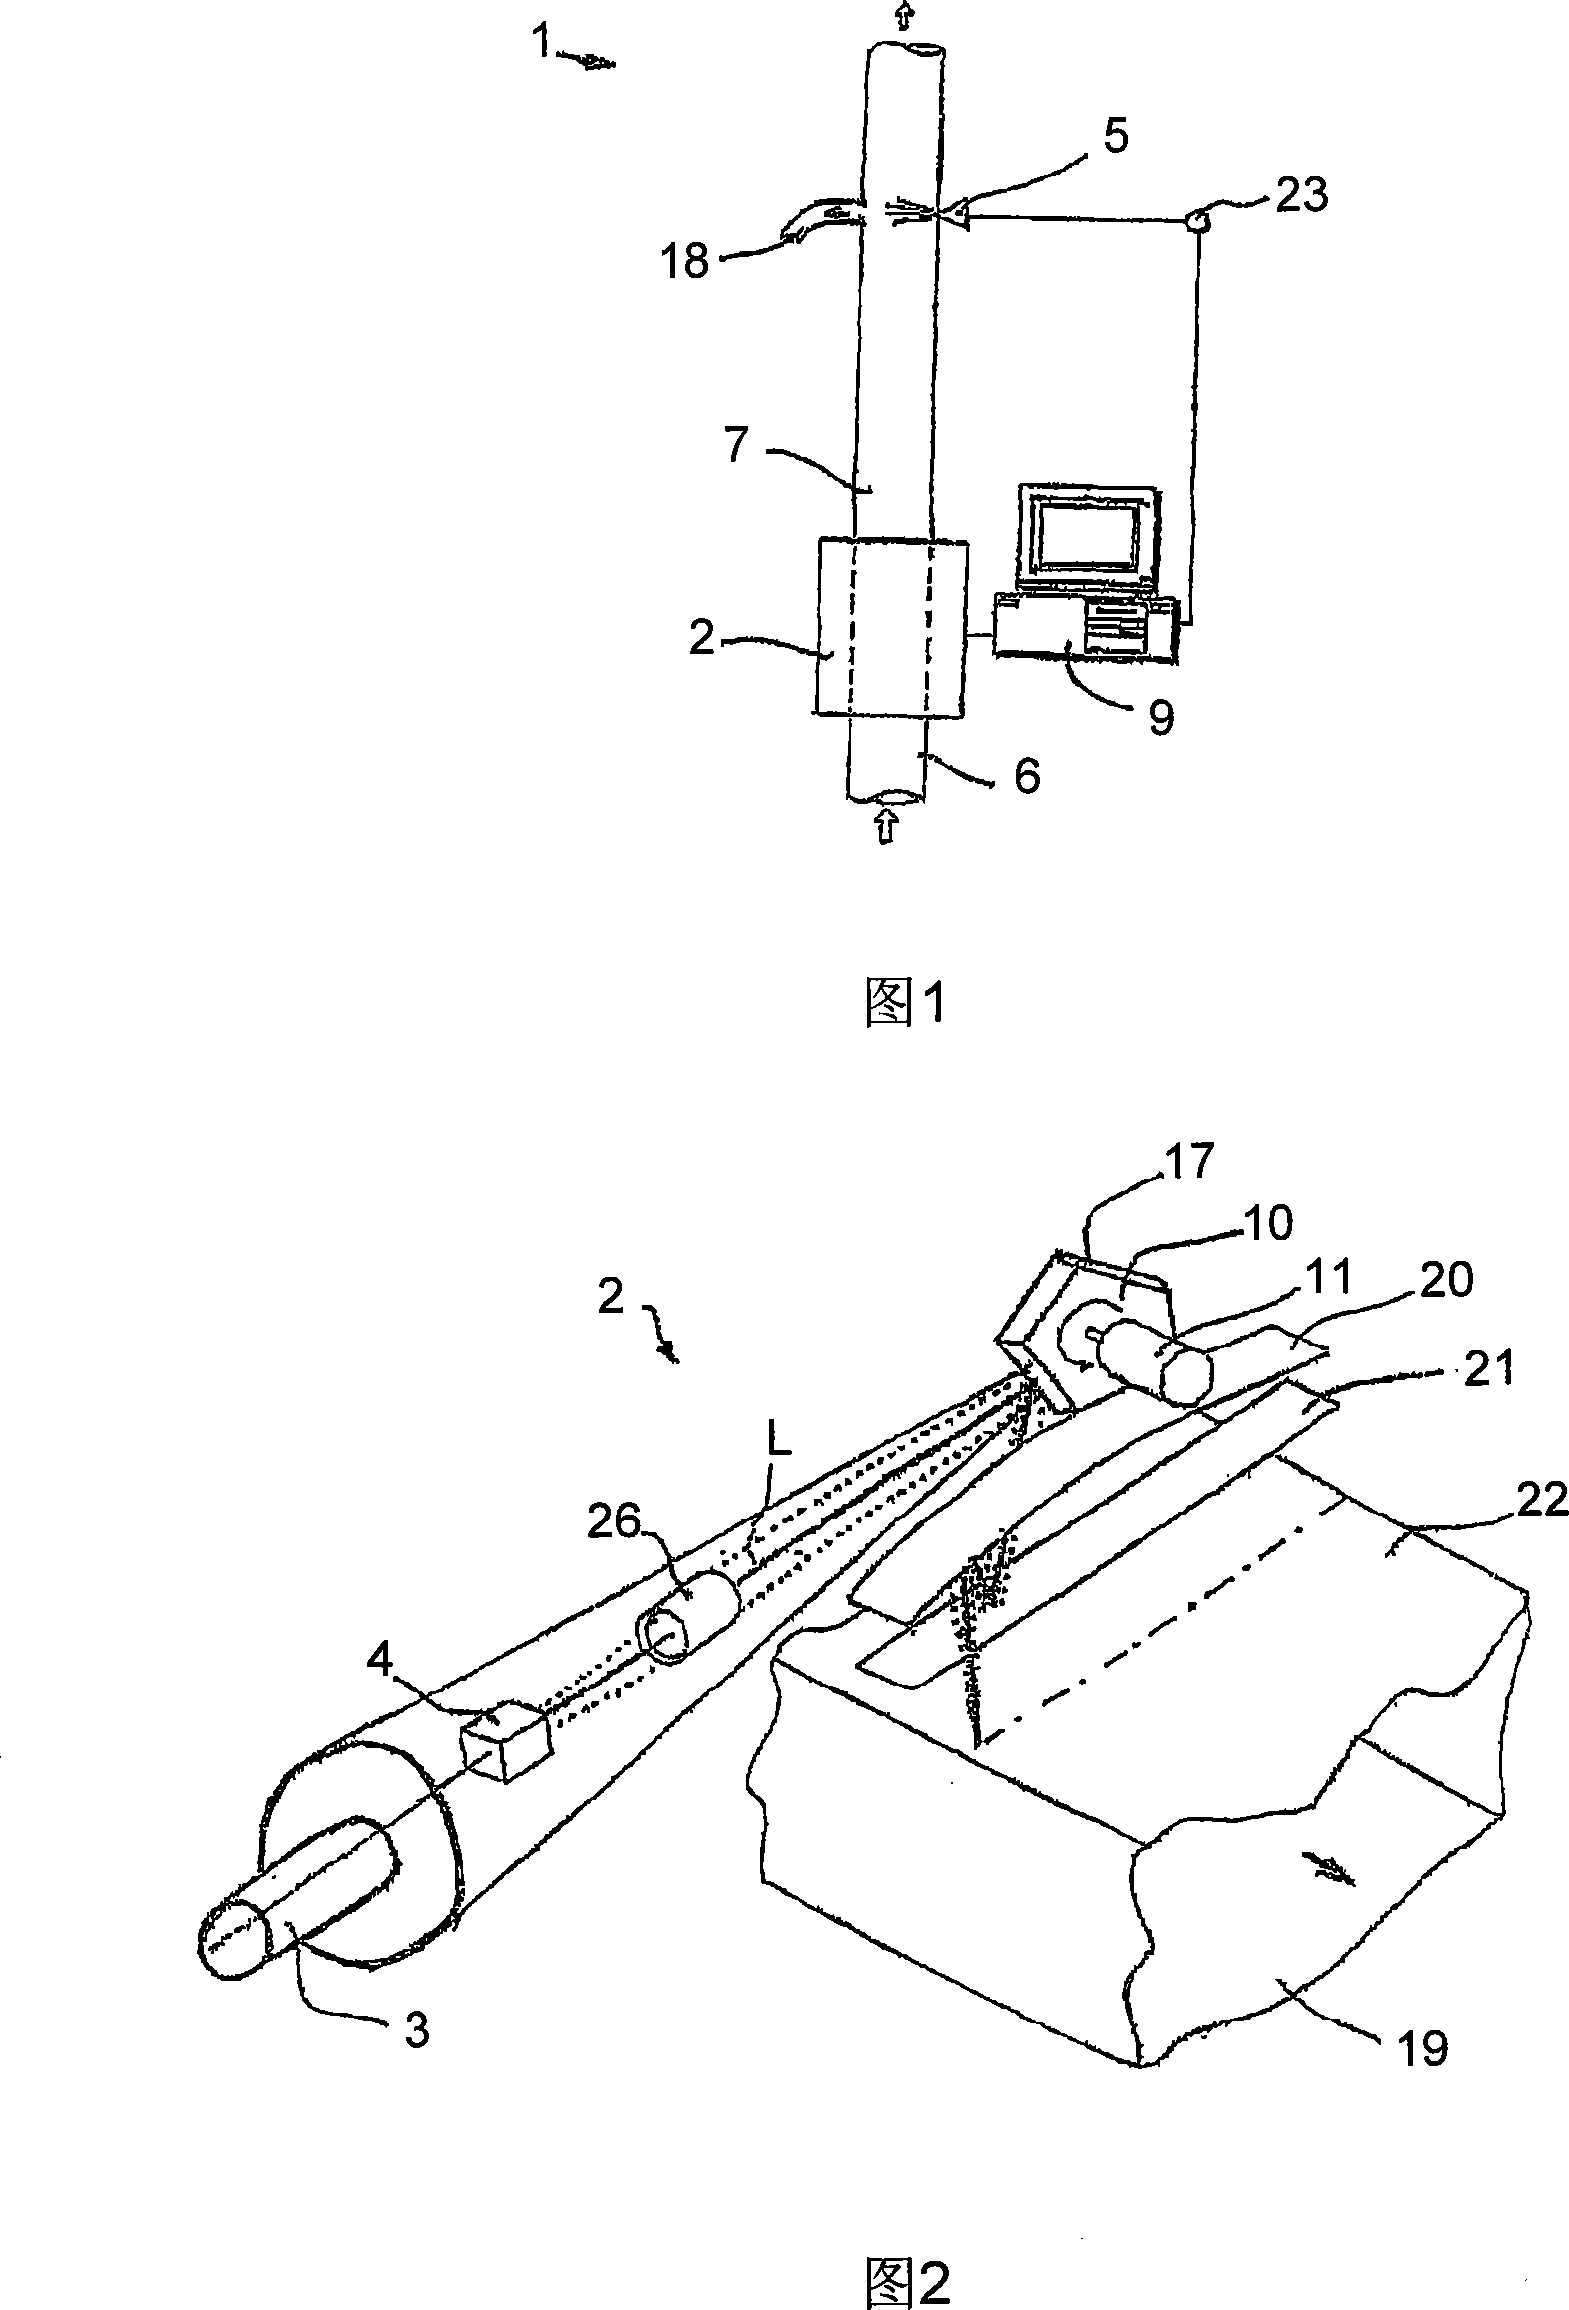 Device for detecting and removing foreign matter